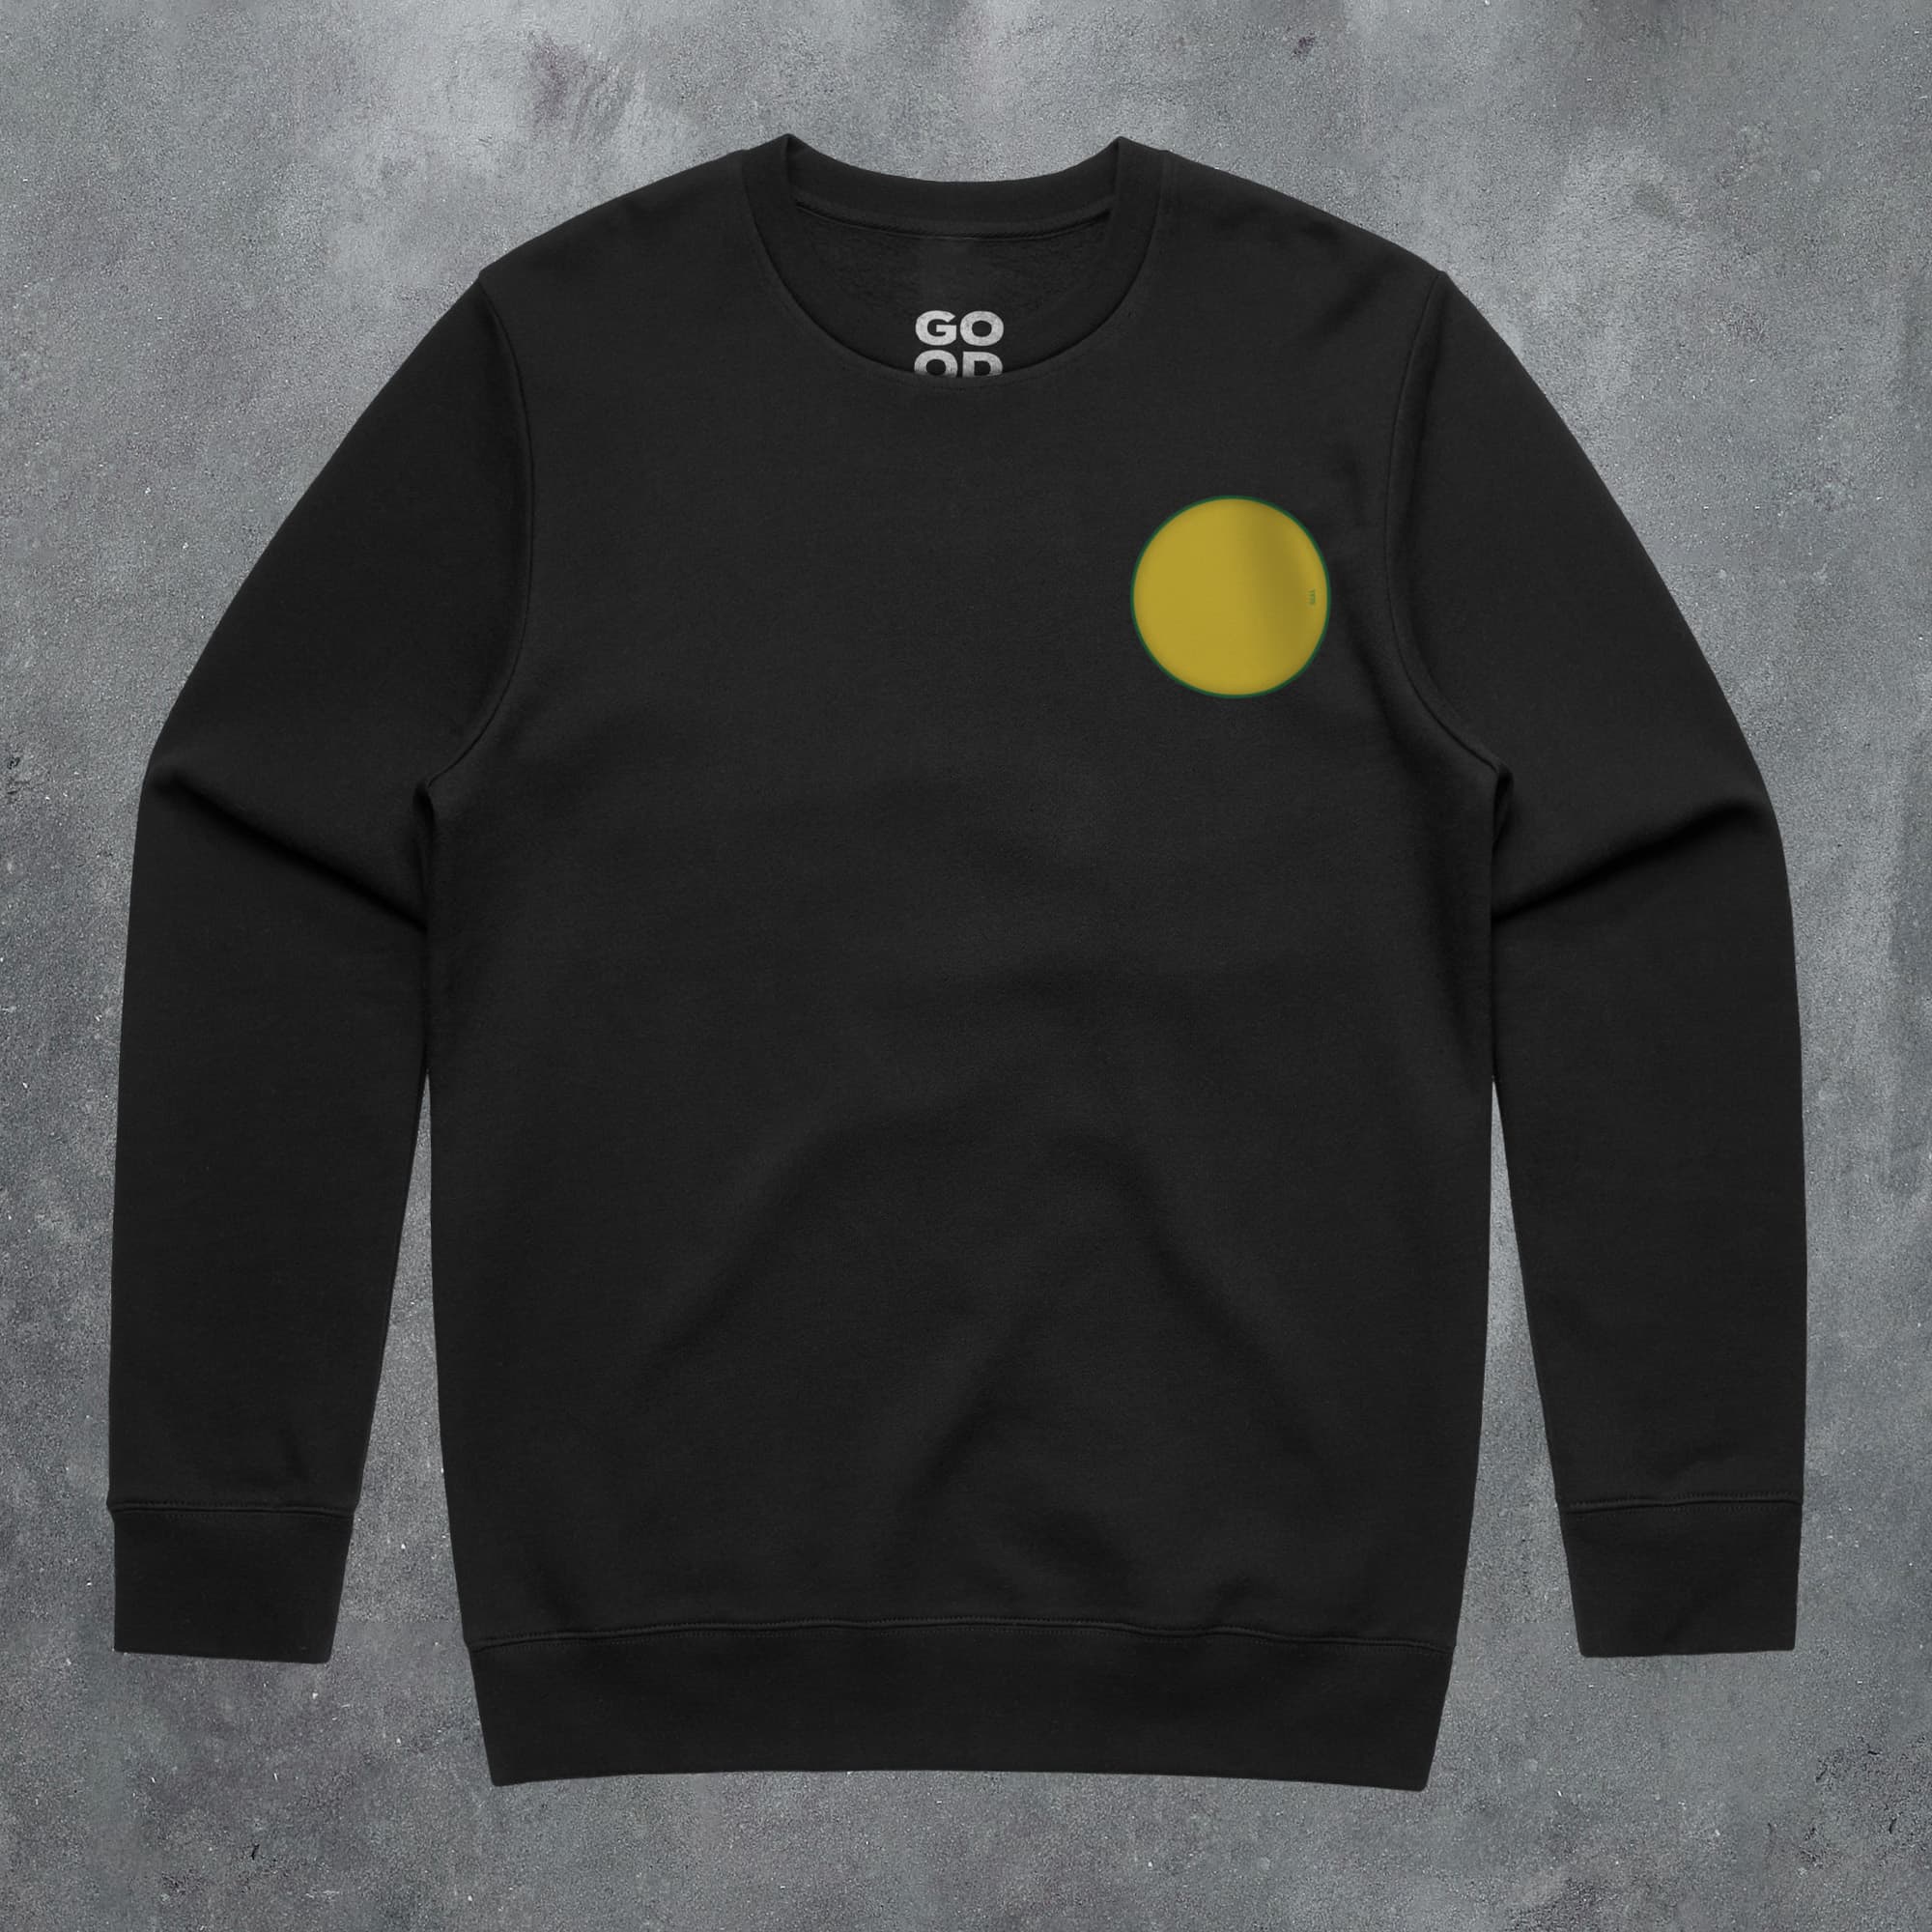 a black sweatshirt with a yellow circle on it